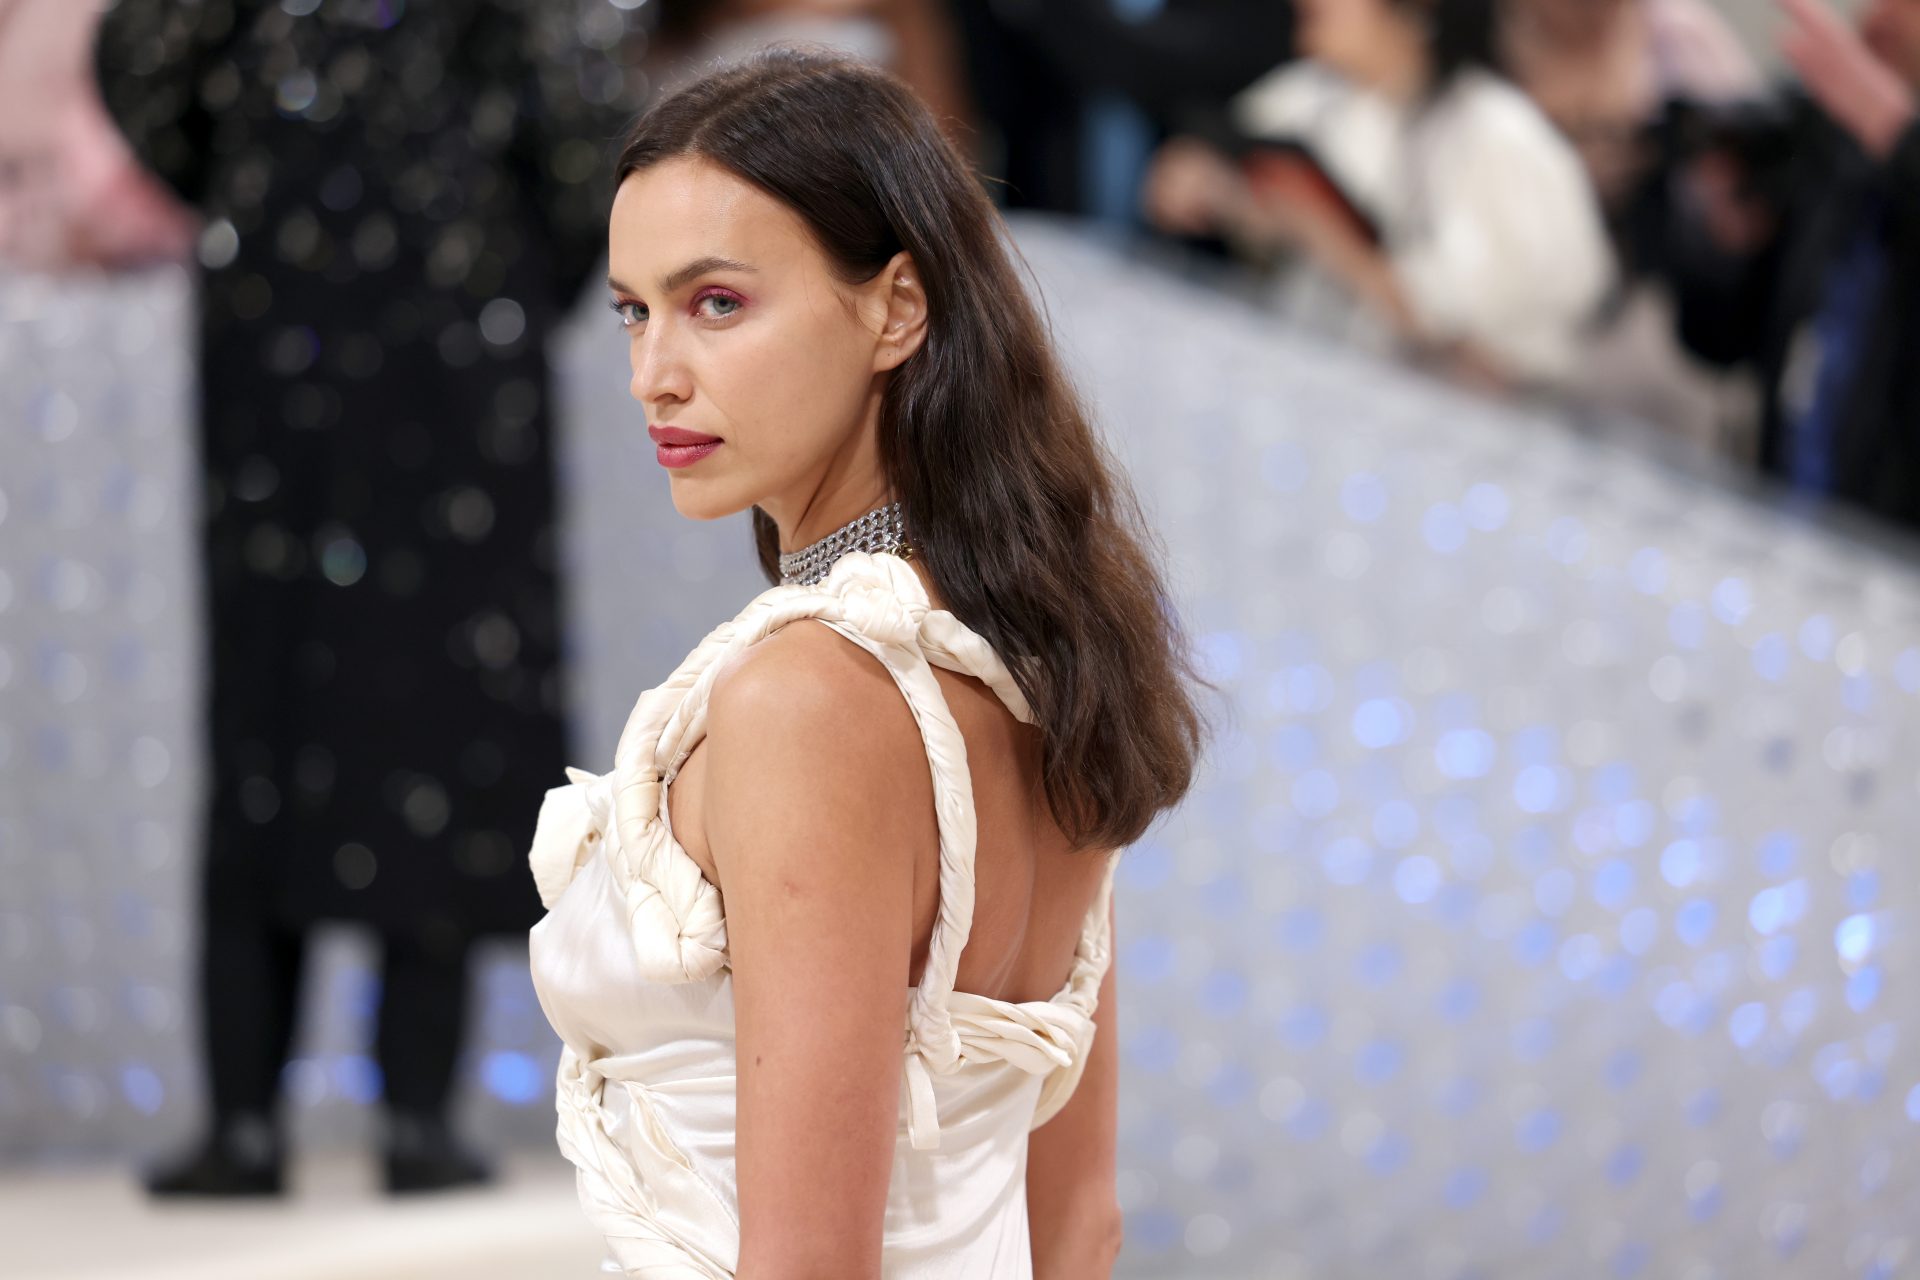 The rise of supermodel Irina Shayk, from Russia to the world